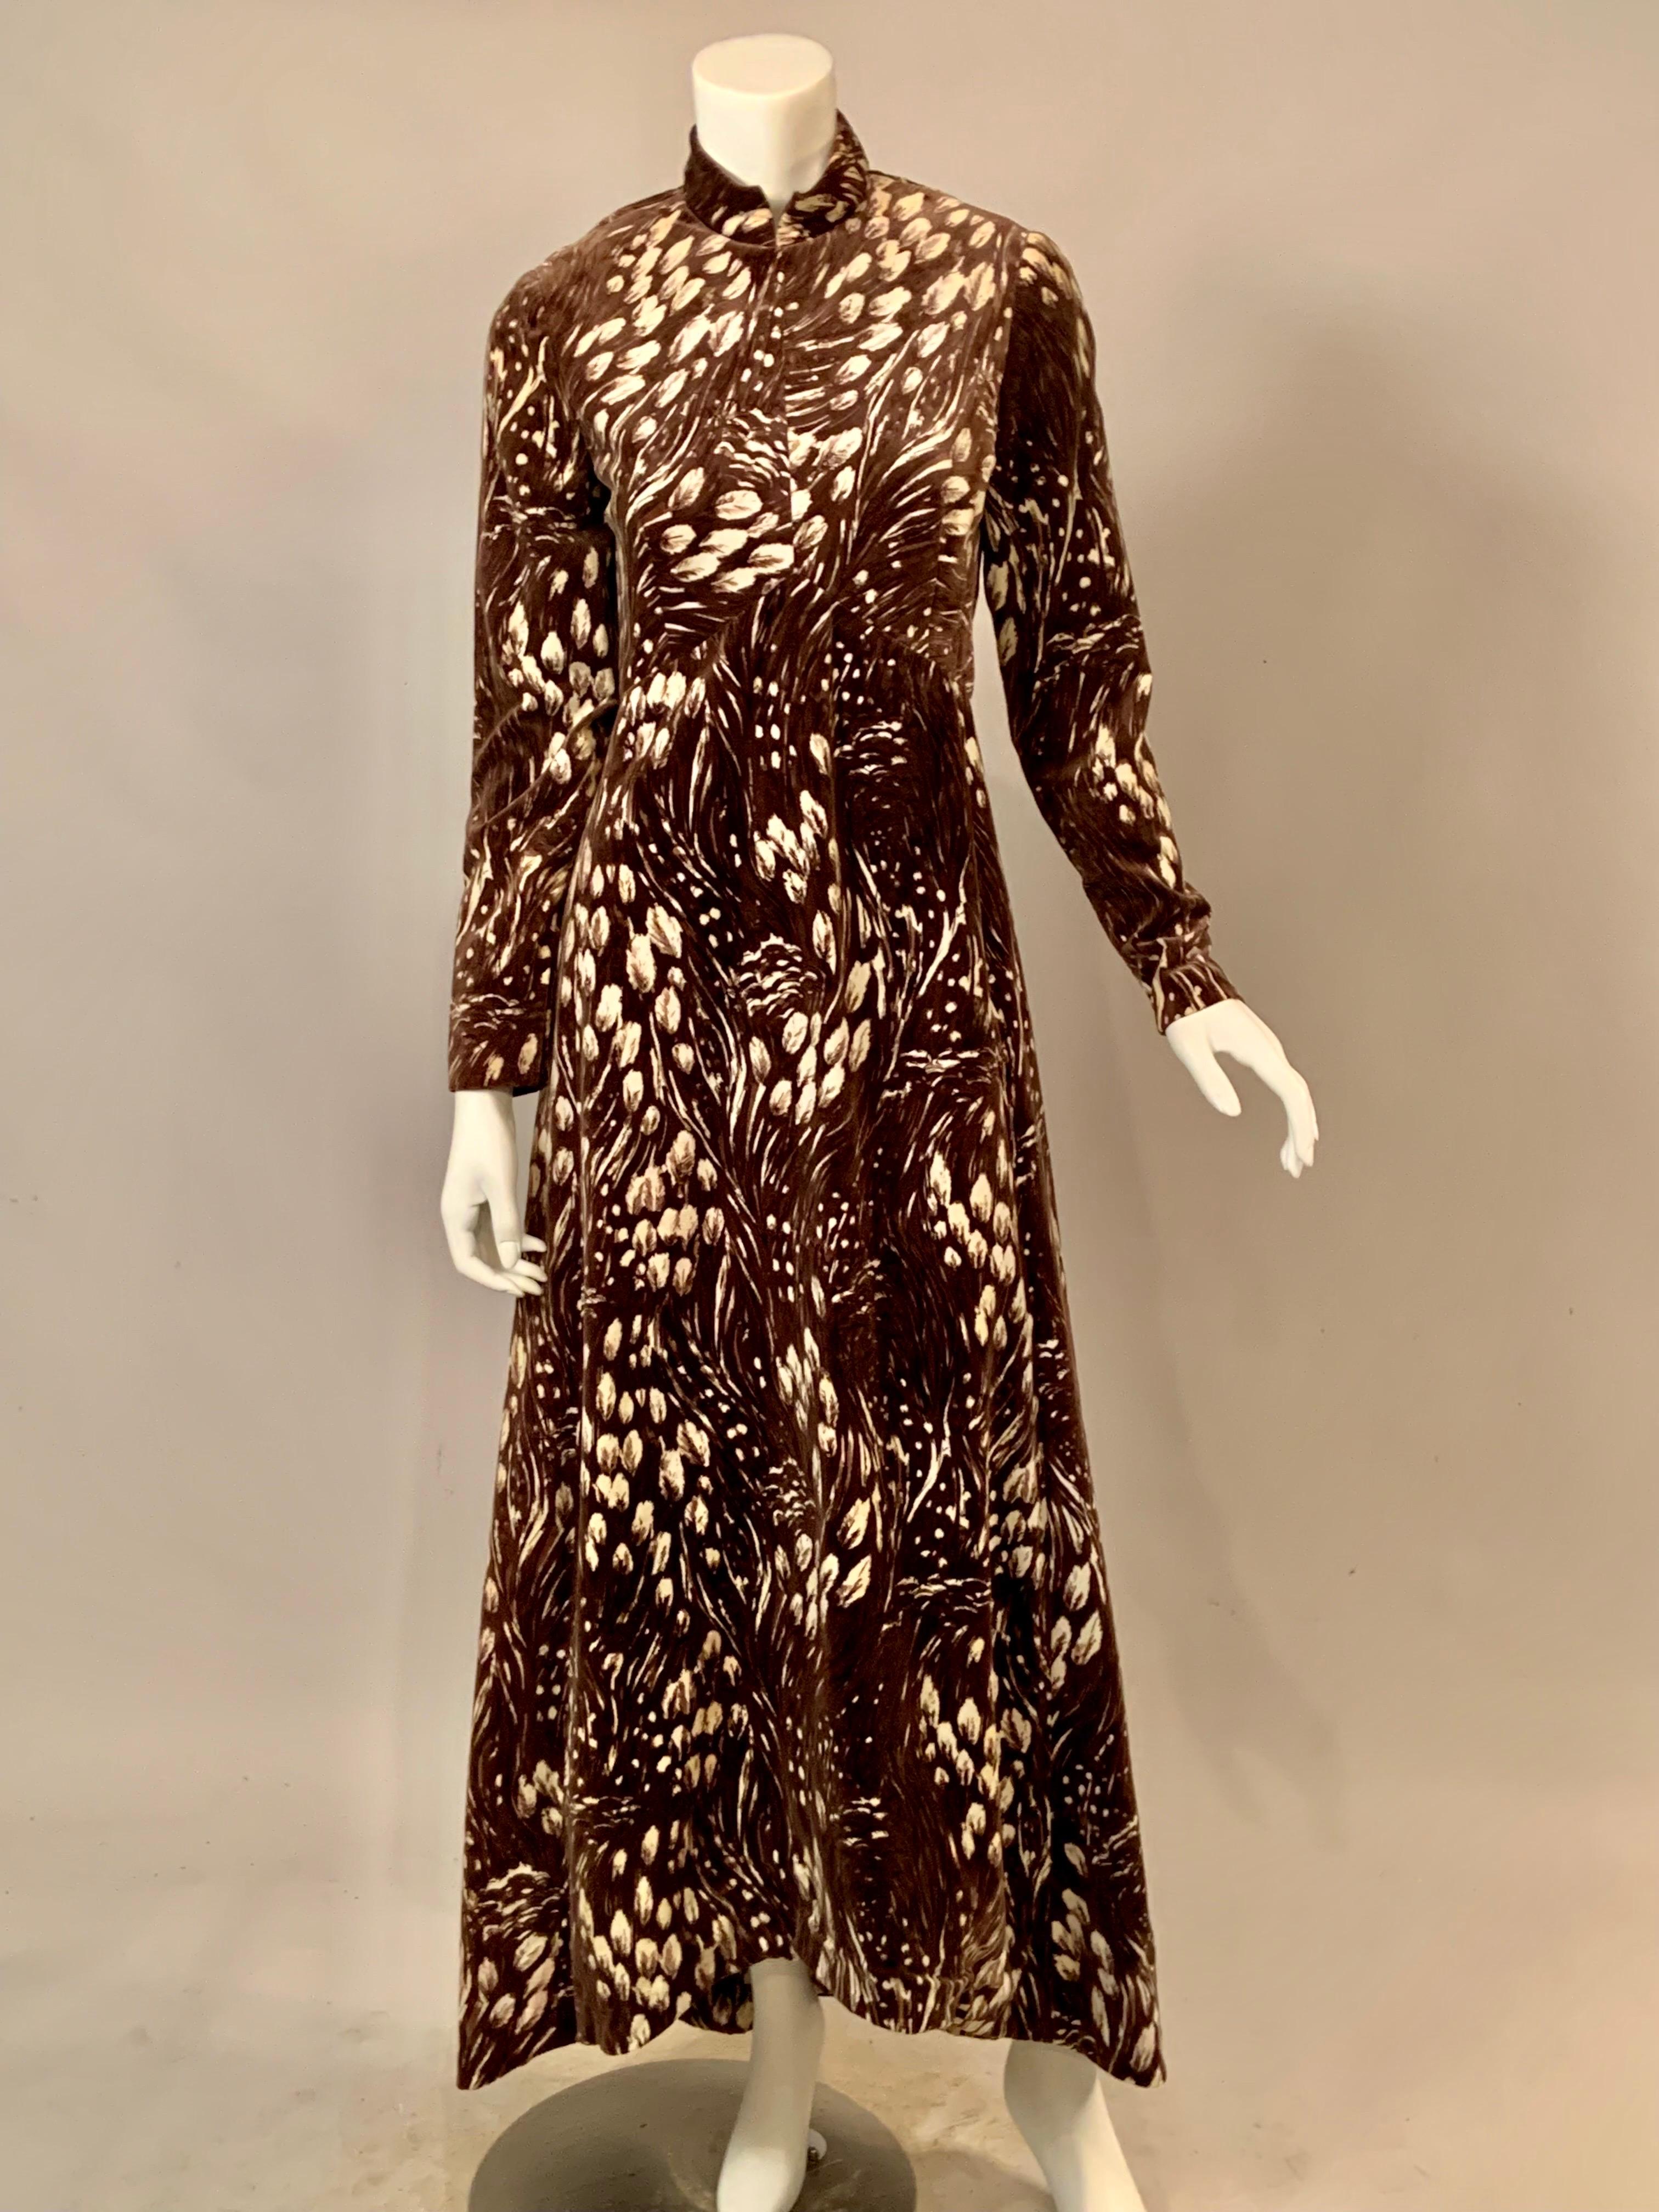 Women's or Men's George Halley Coffee and Cream Colored Feather Printed Velvet Evening Dress For Sale